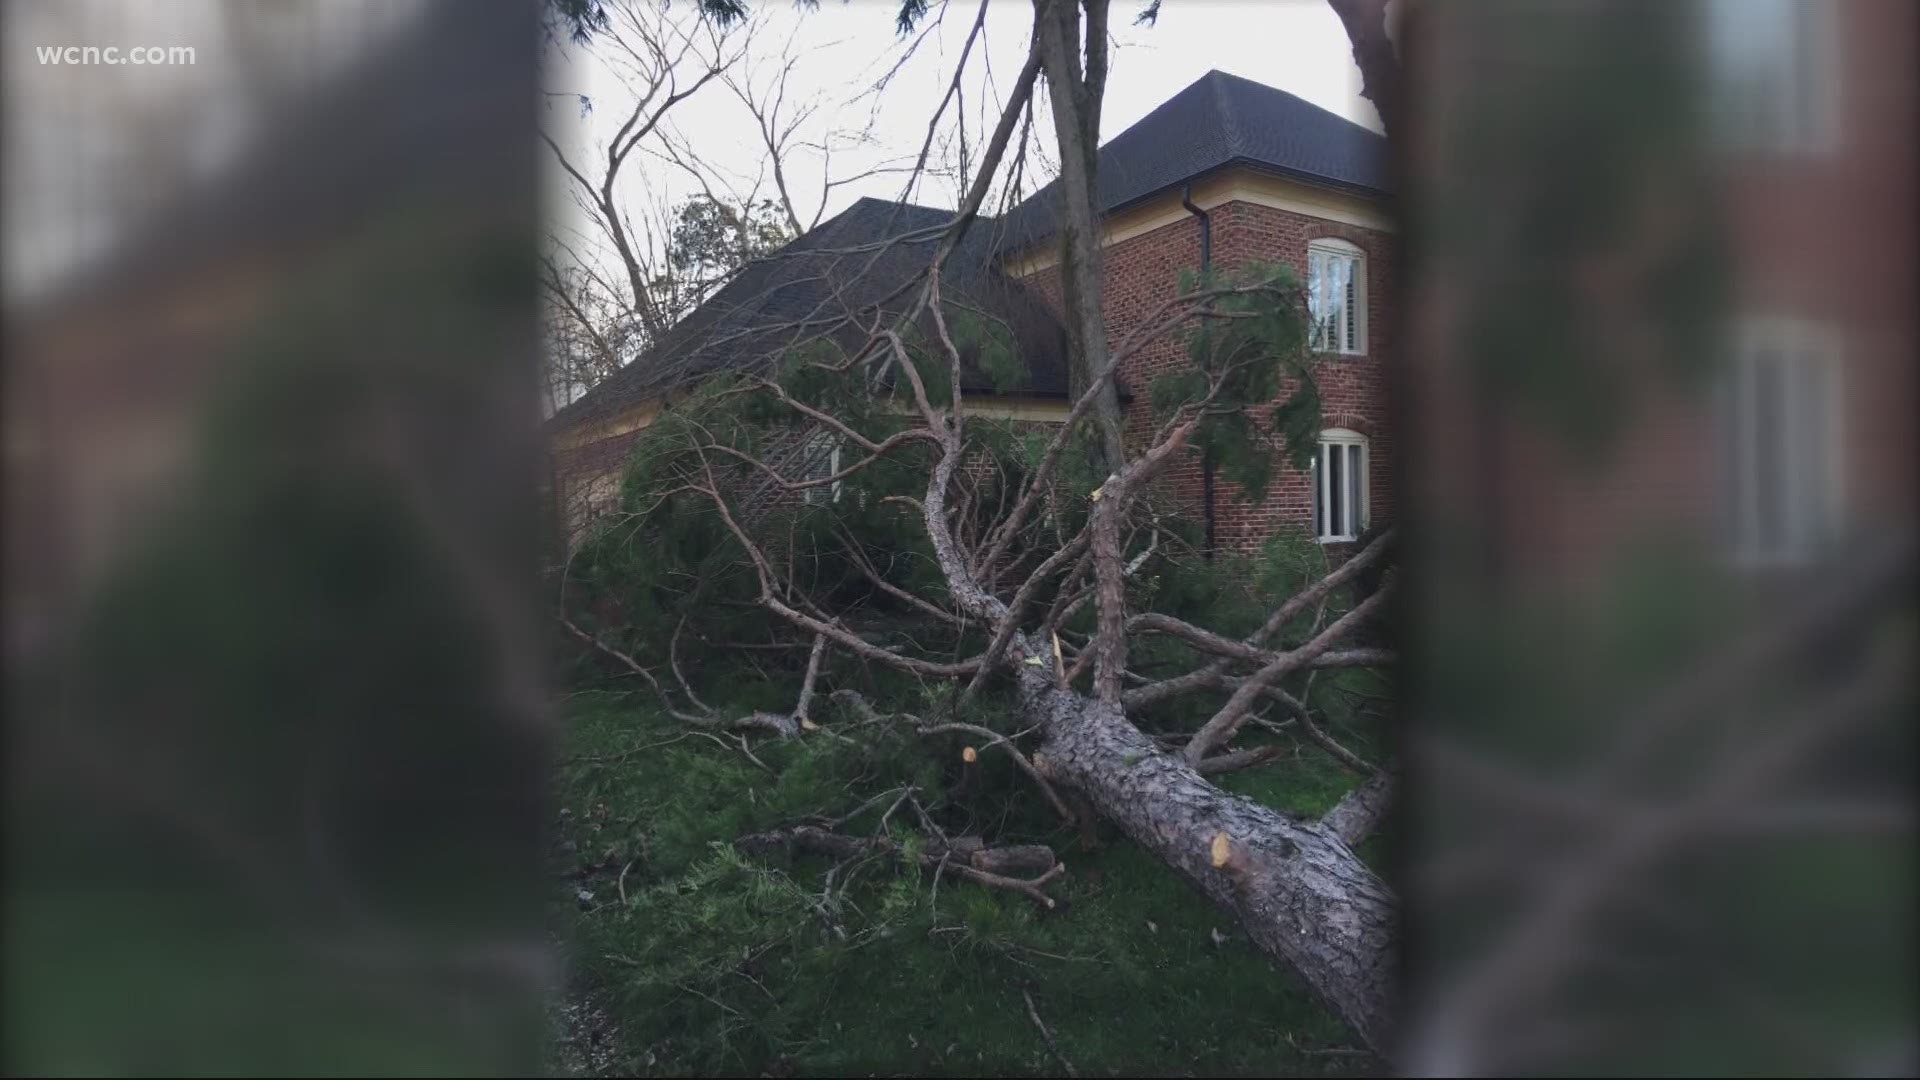 Neighbors in South Charlotte say they still remember the sight and sounds when an EF-1 tornado flew through their neighborhood on Feb. 6, 2020.